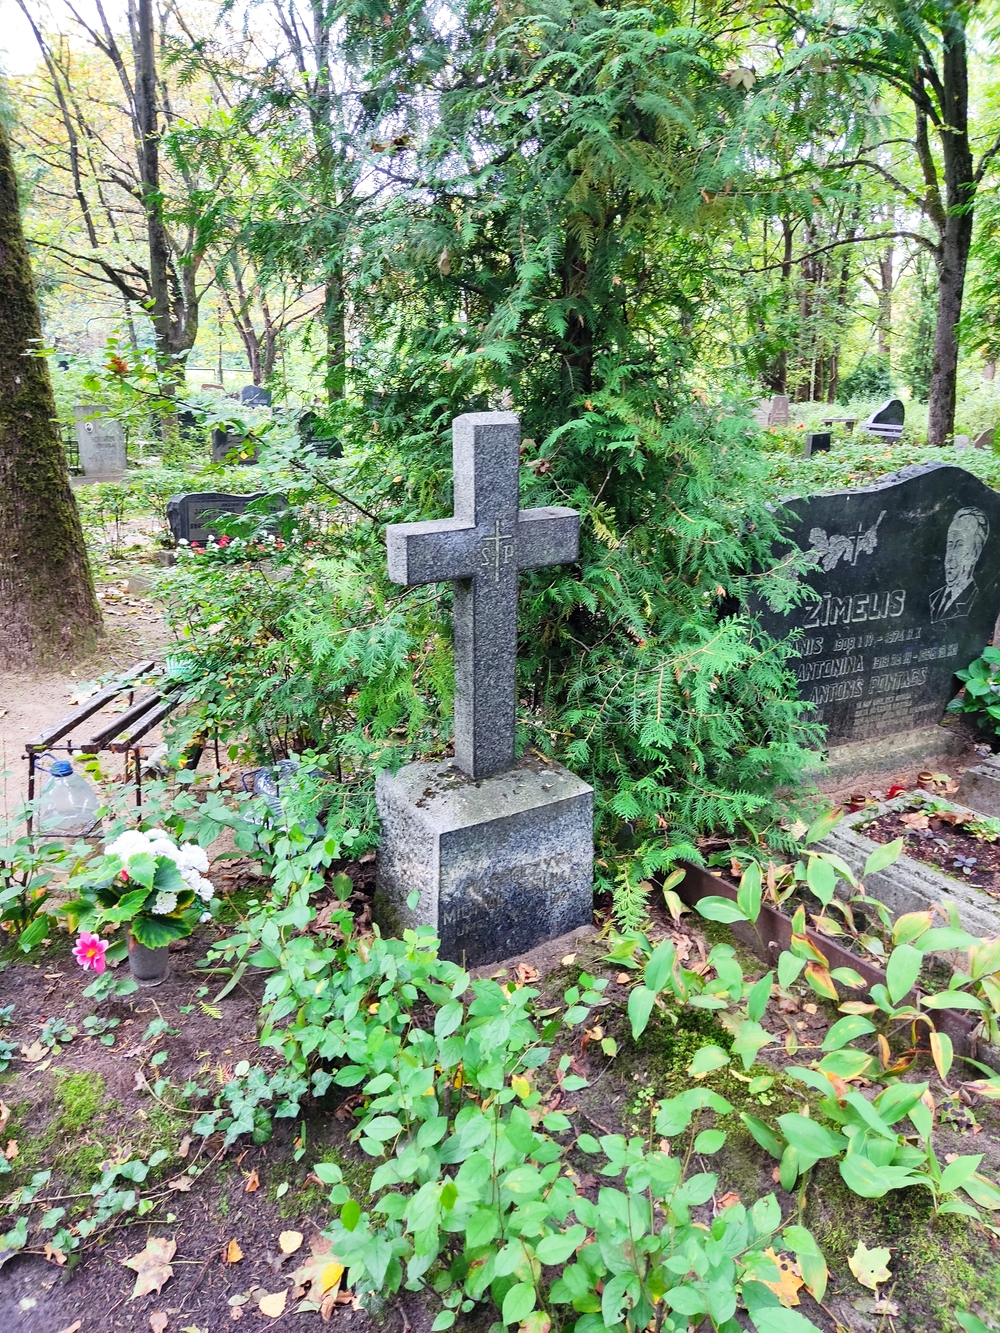 Tombstone of Michał Trukan, sector 87 according to the administrative plan of the cemetery